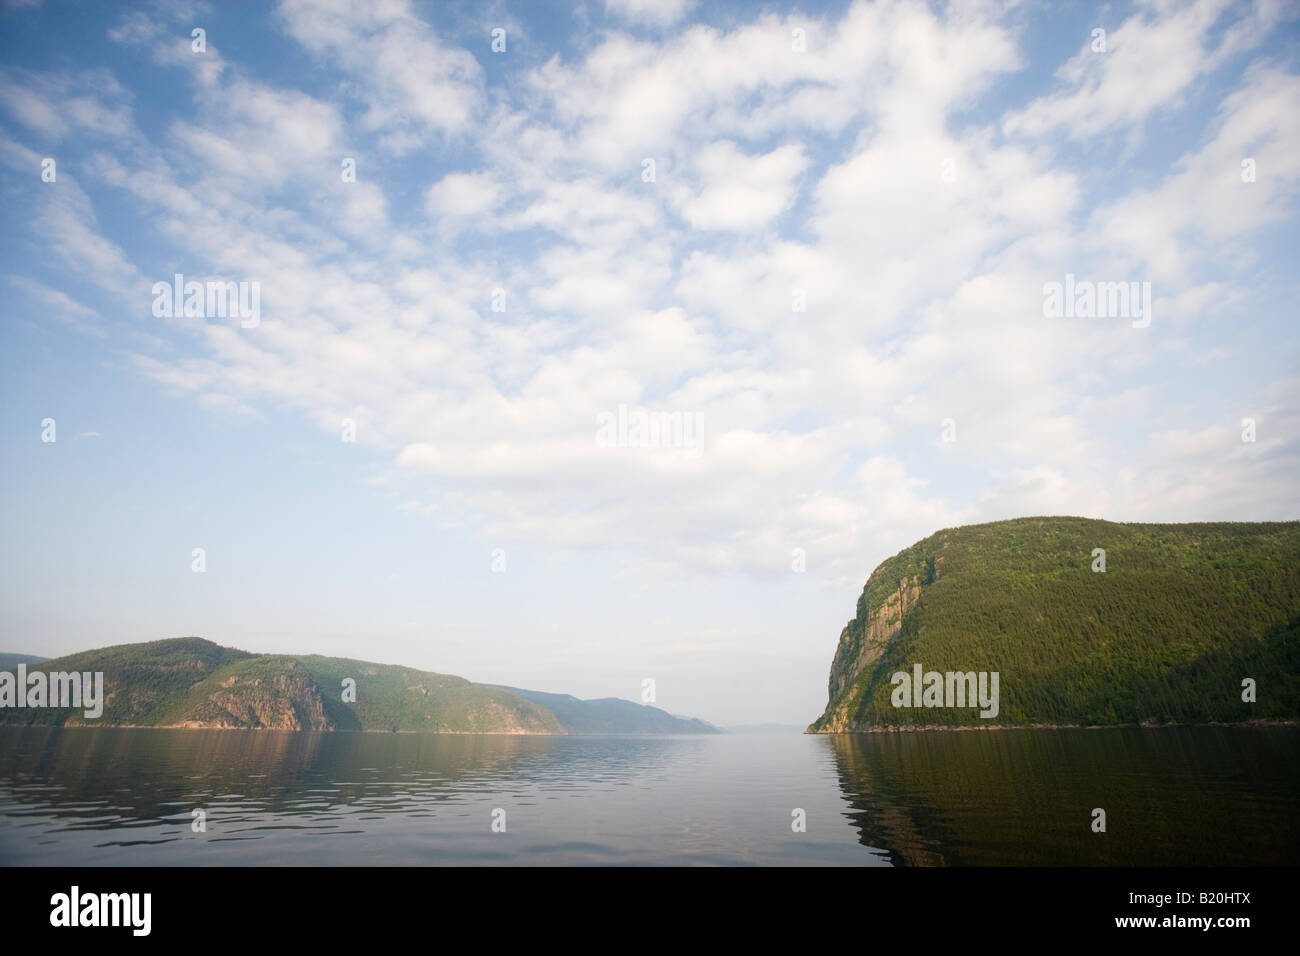 Cap Eternite (right) and Cap Liberte (left) in the Saguenay Fjord in Saguenay National Park. Quebec, Canada. Stock Photo